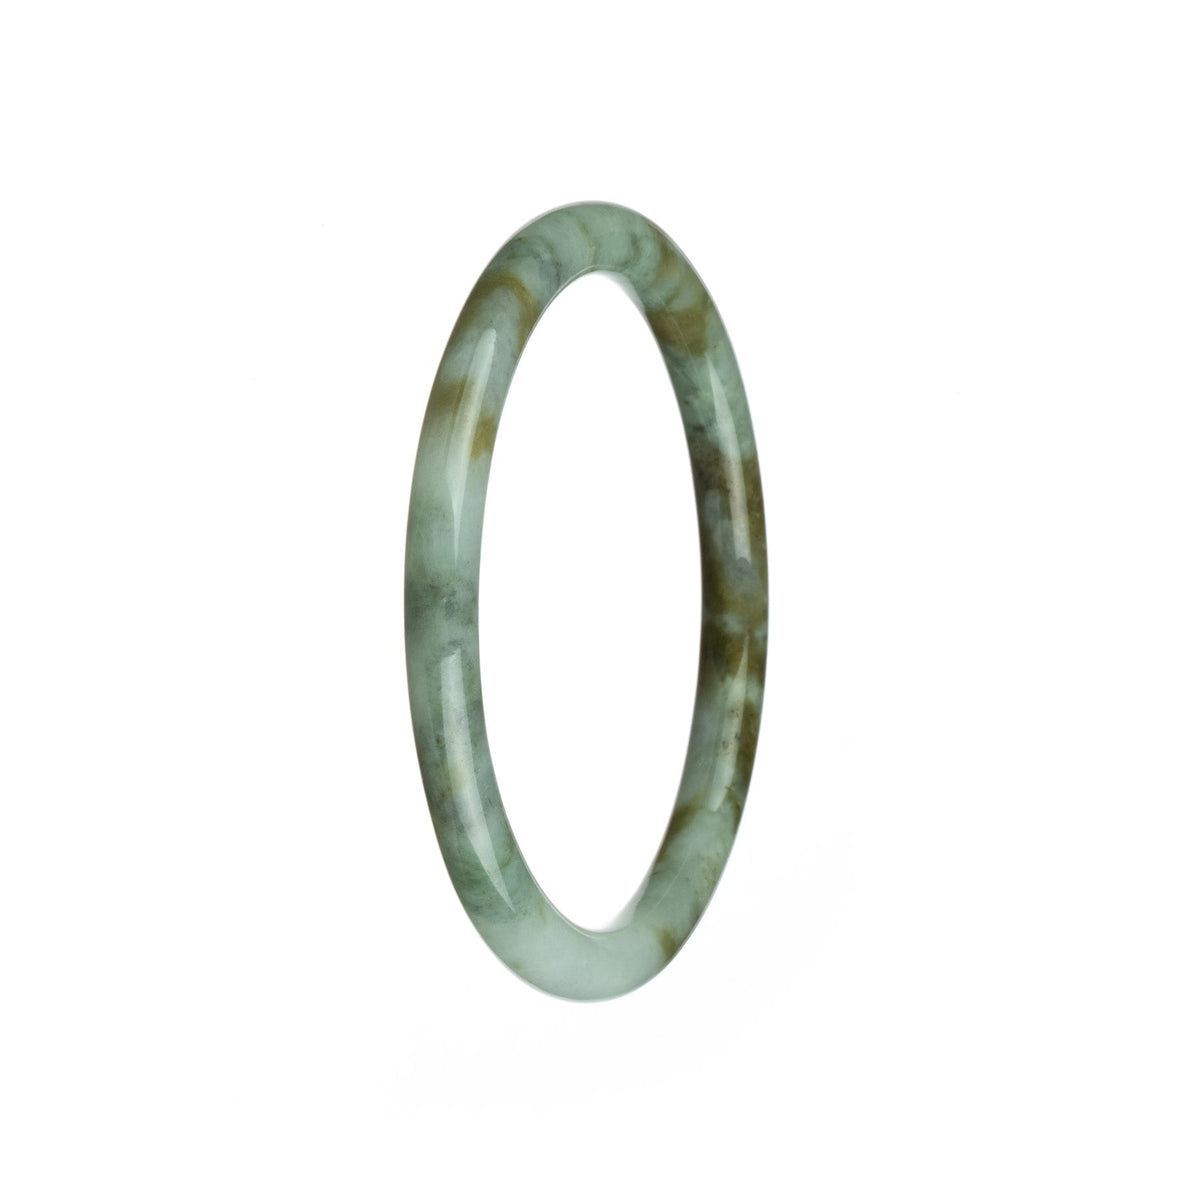 A close-up image of a small round jade bangle with a white base color and brown patterns. This traditional accessory is made of high-quality Grade A jade.